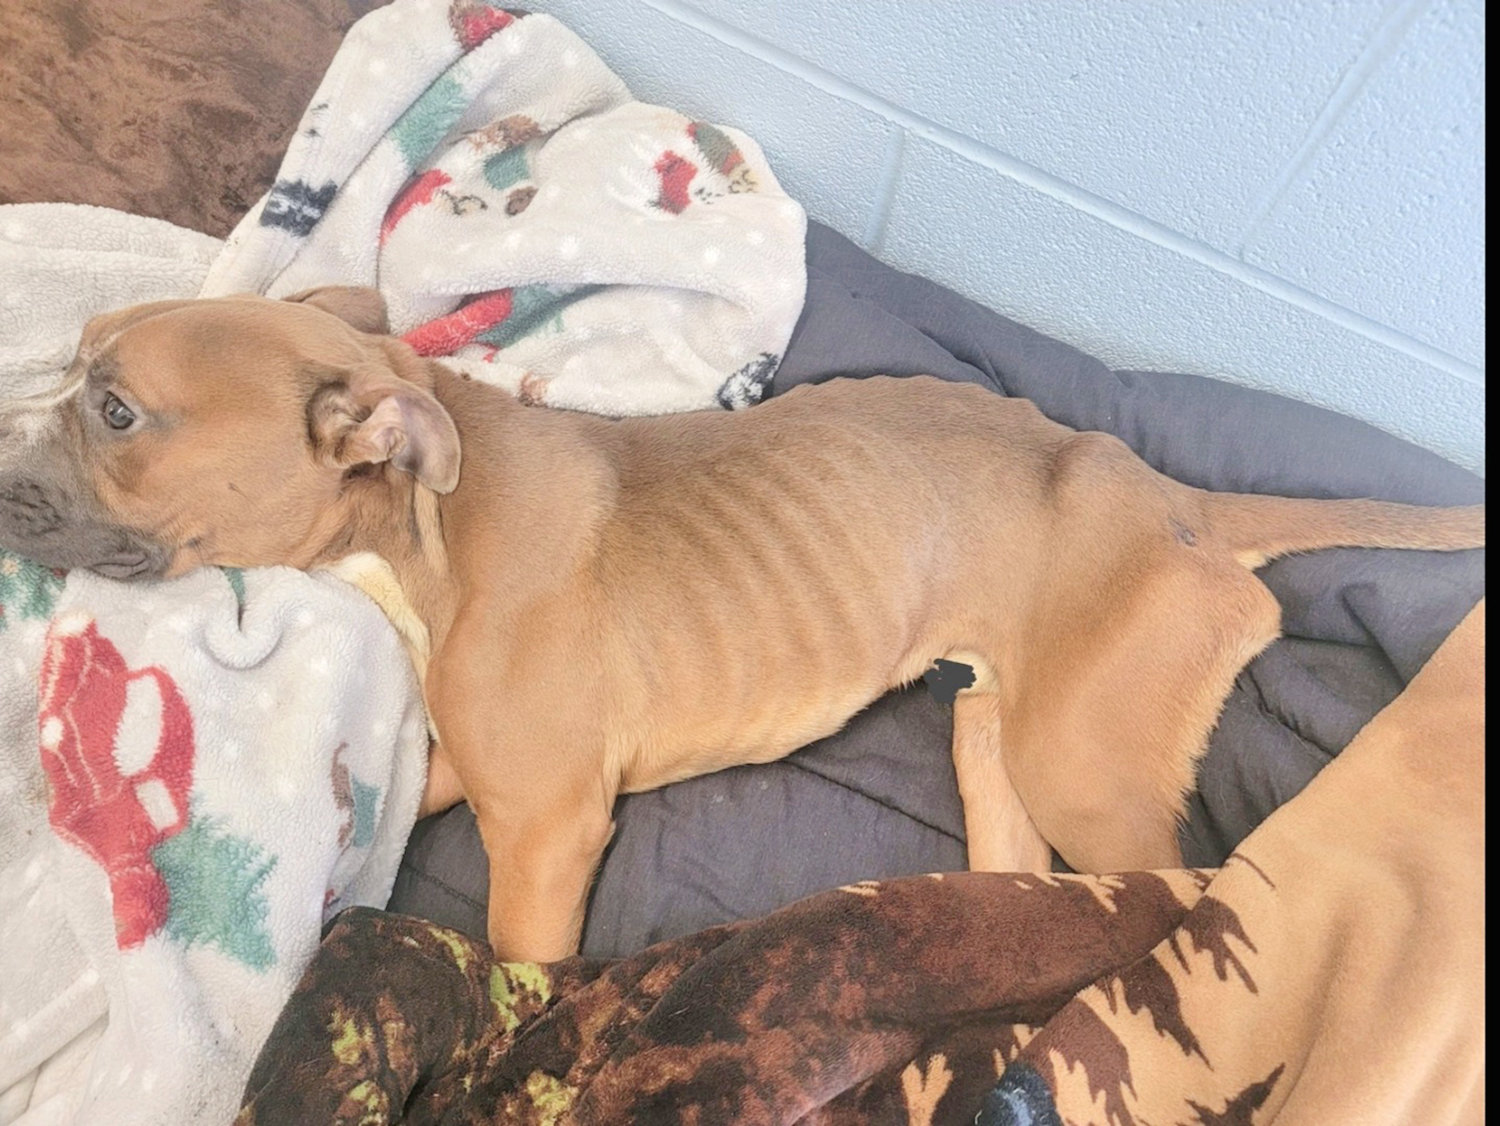 This malnourished dog was found abandoned in Frankfort in Herkimer County. Anyone with information on the dog or the owner is asked to call police at 315-894-3594.